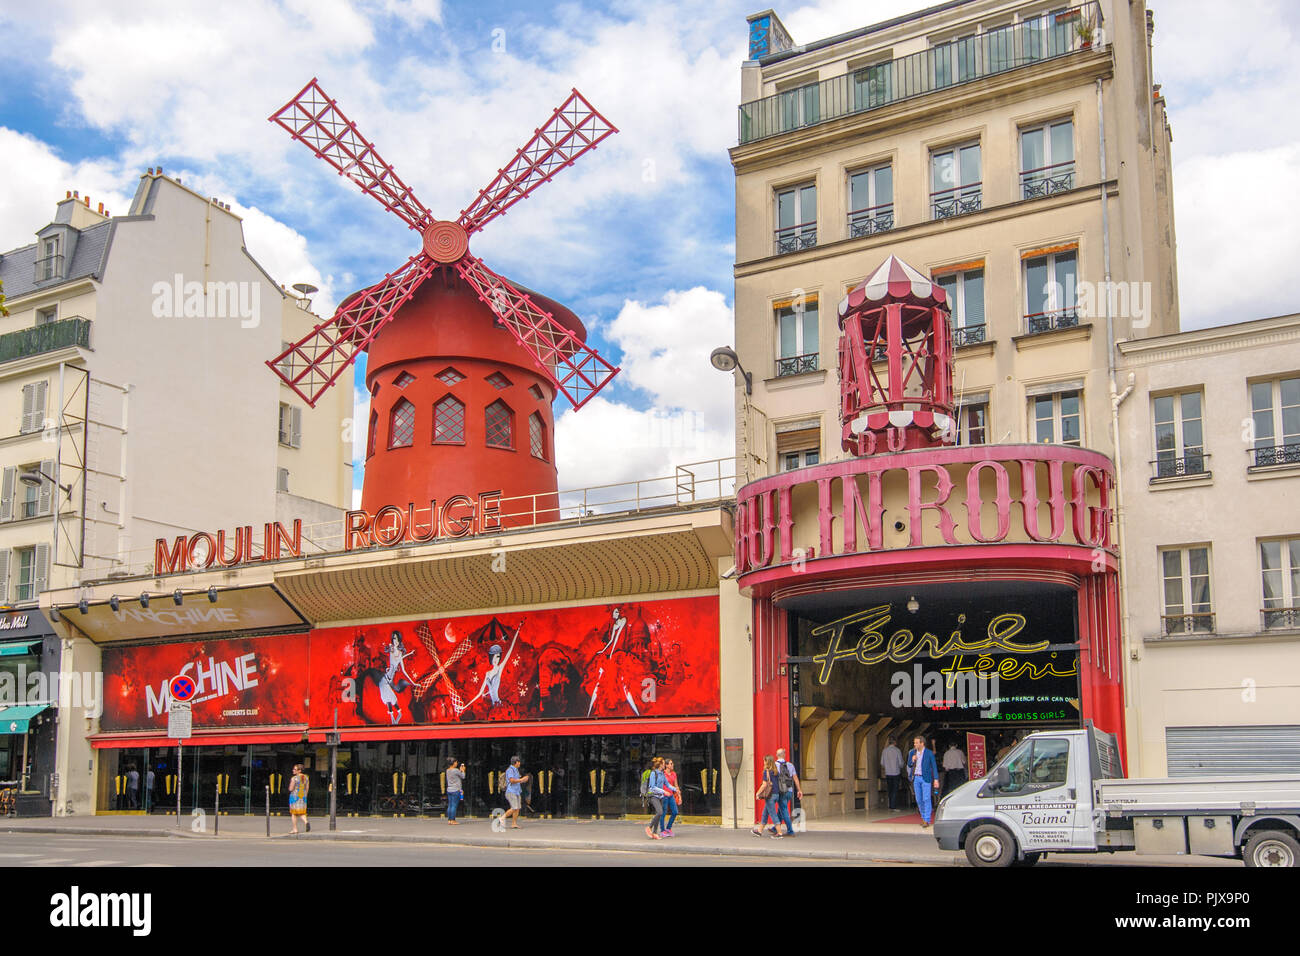 Paris, France - June 12, 2015: Moulin Rouge, a cabaret in Paris, marked by the red windmill on its roof. Stock Photo